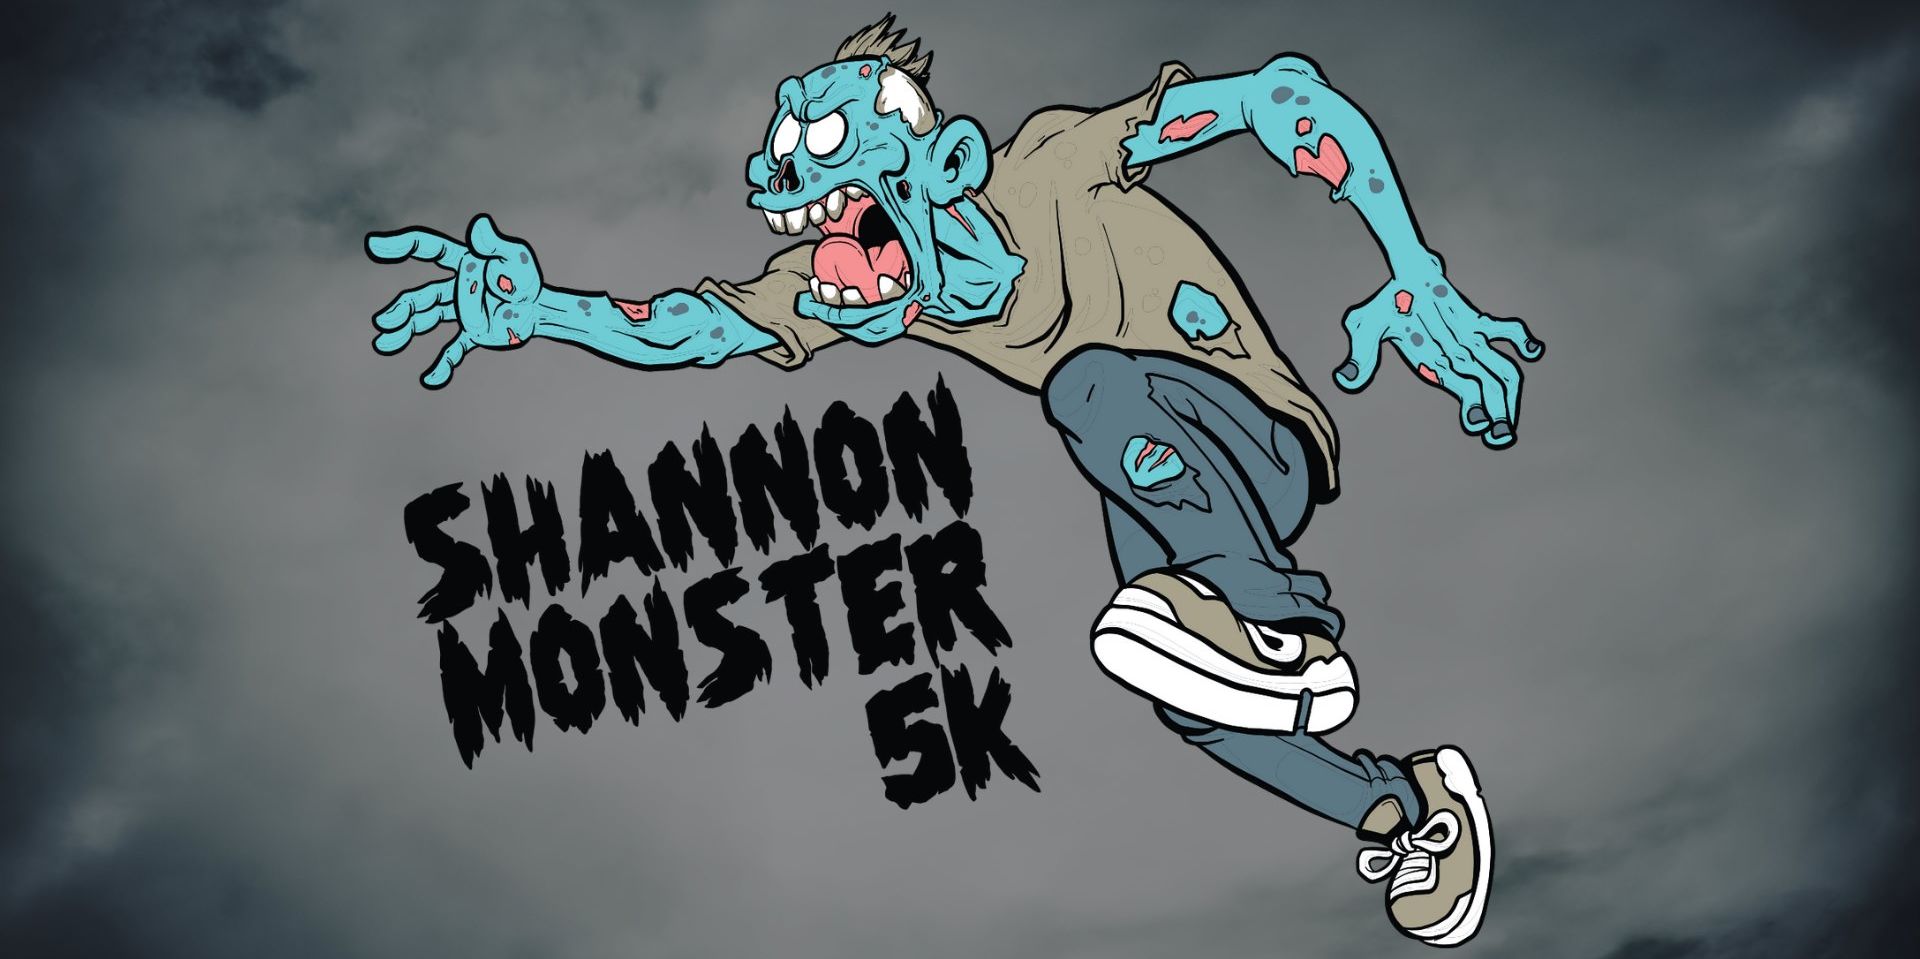 Shannon Brewing Monster 5K promotional image